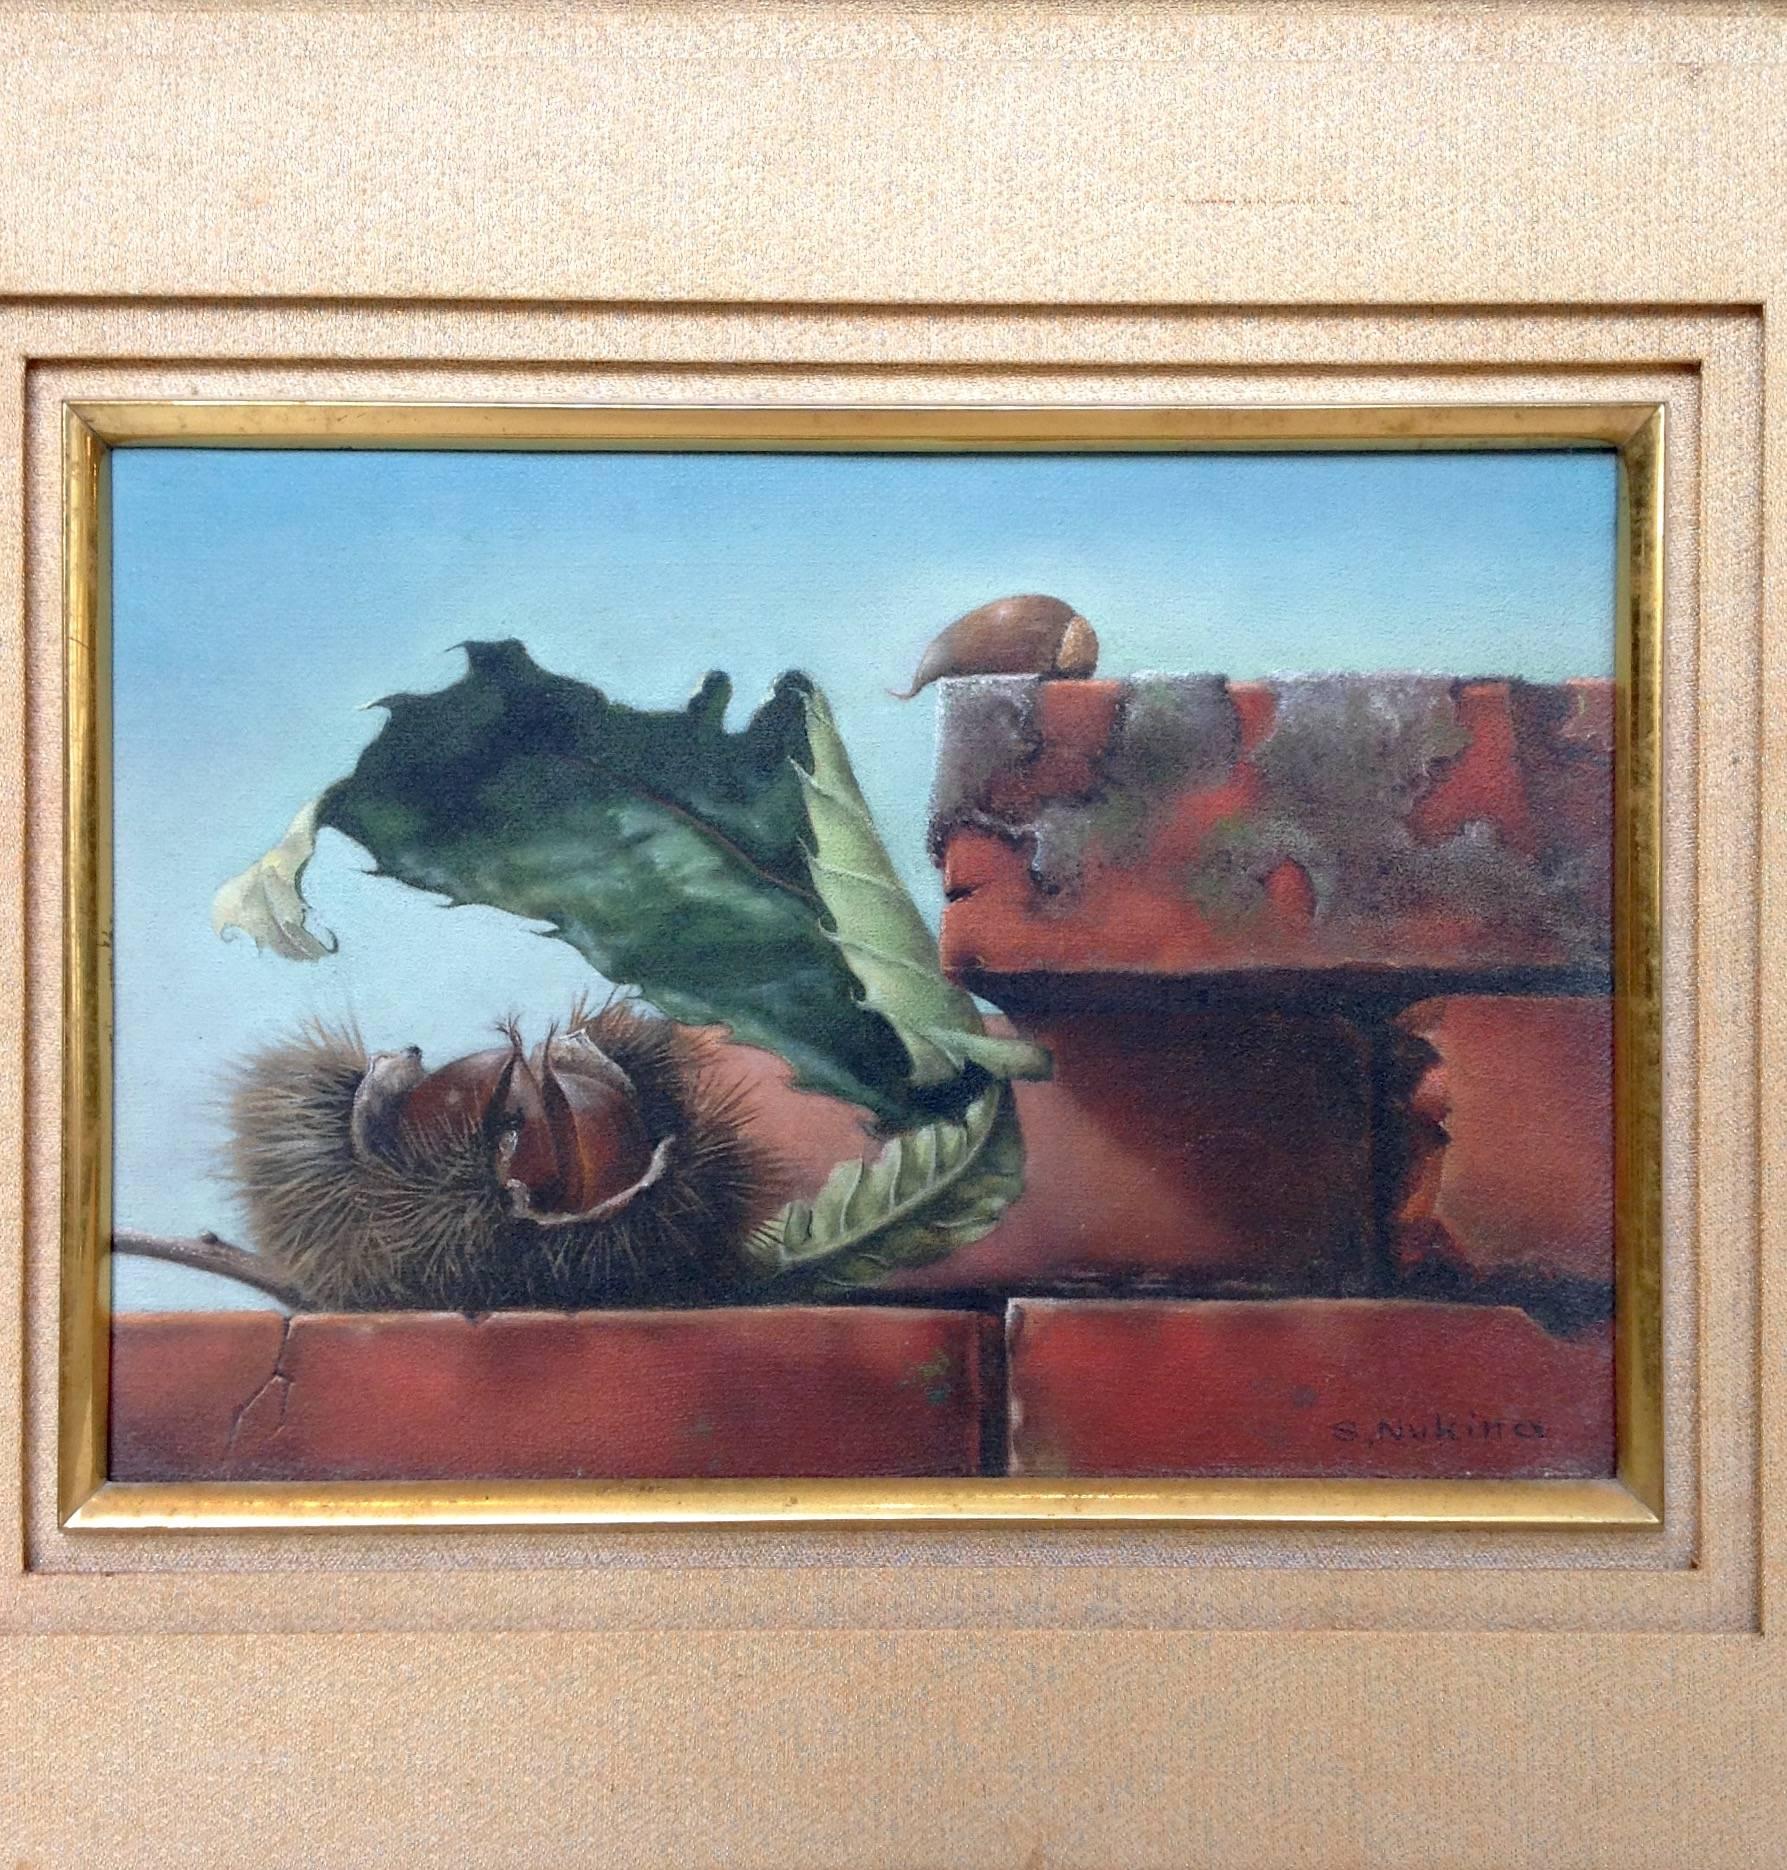 Small oil on canvas by Japanese artist Shiro Nukina depicting chestnuts resting on a brick wall. It has a wood frame and a silk brocade mat. Signed in the lower right.